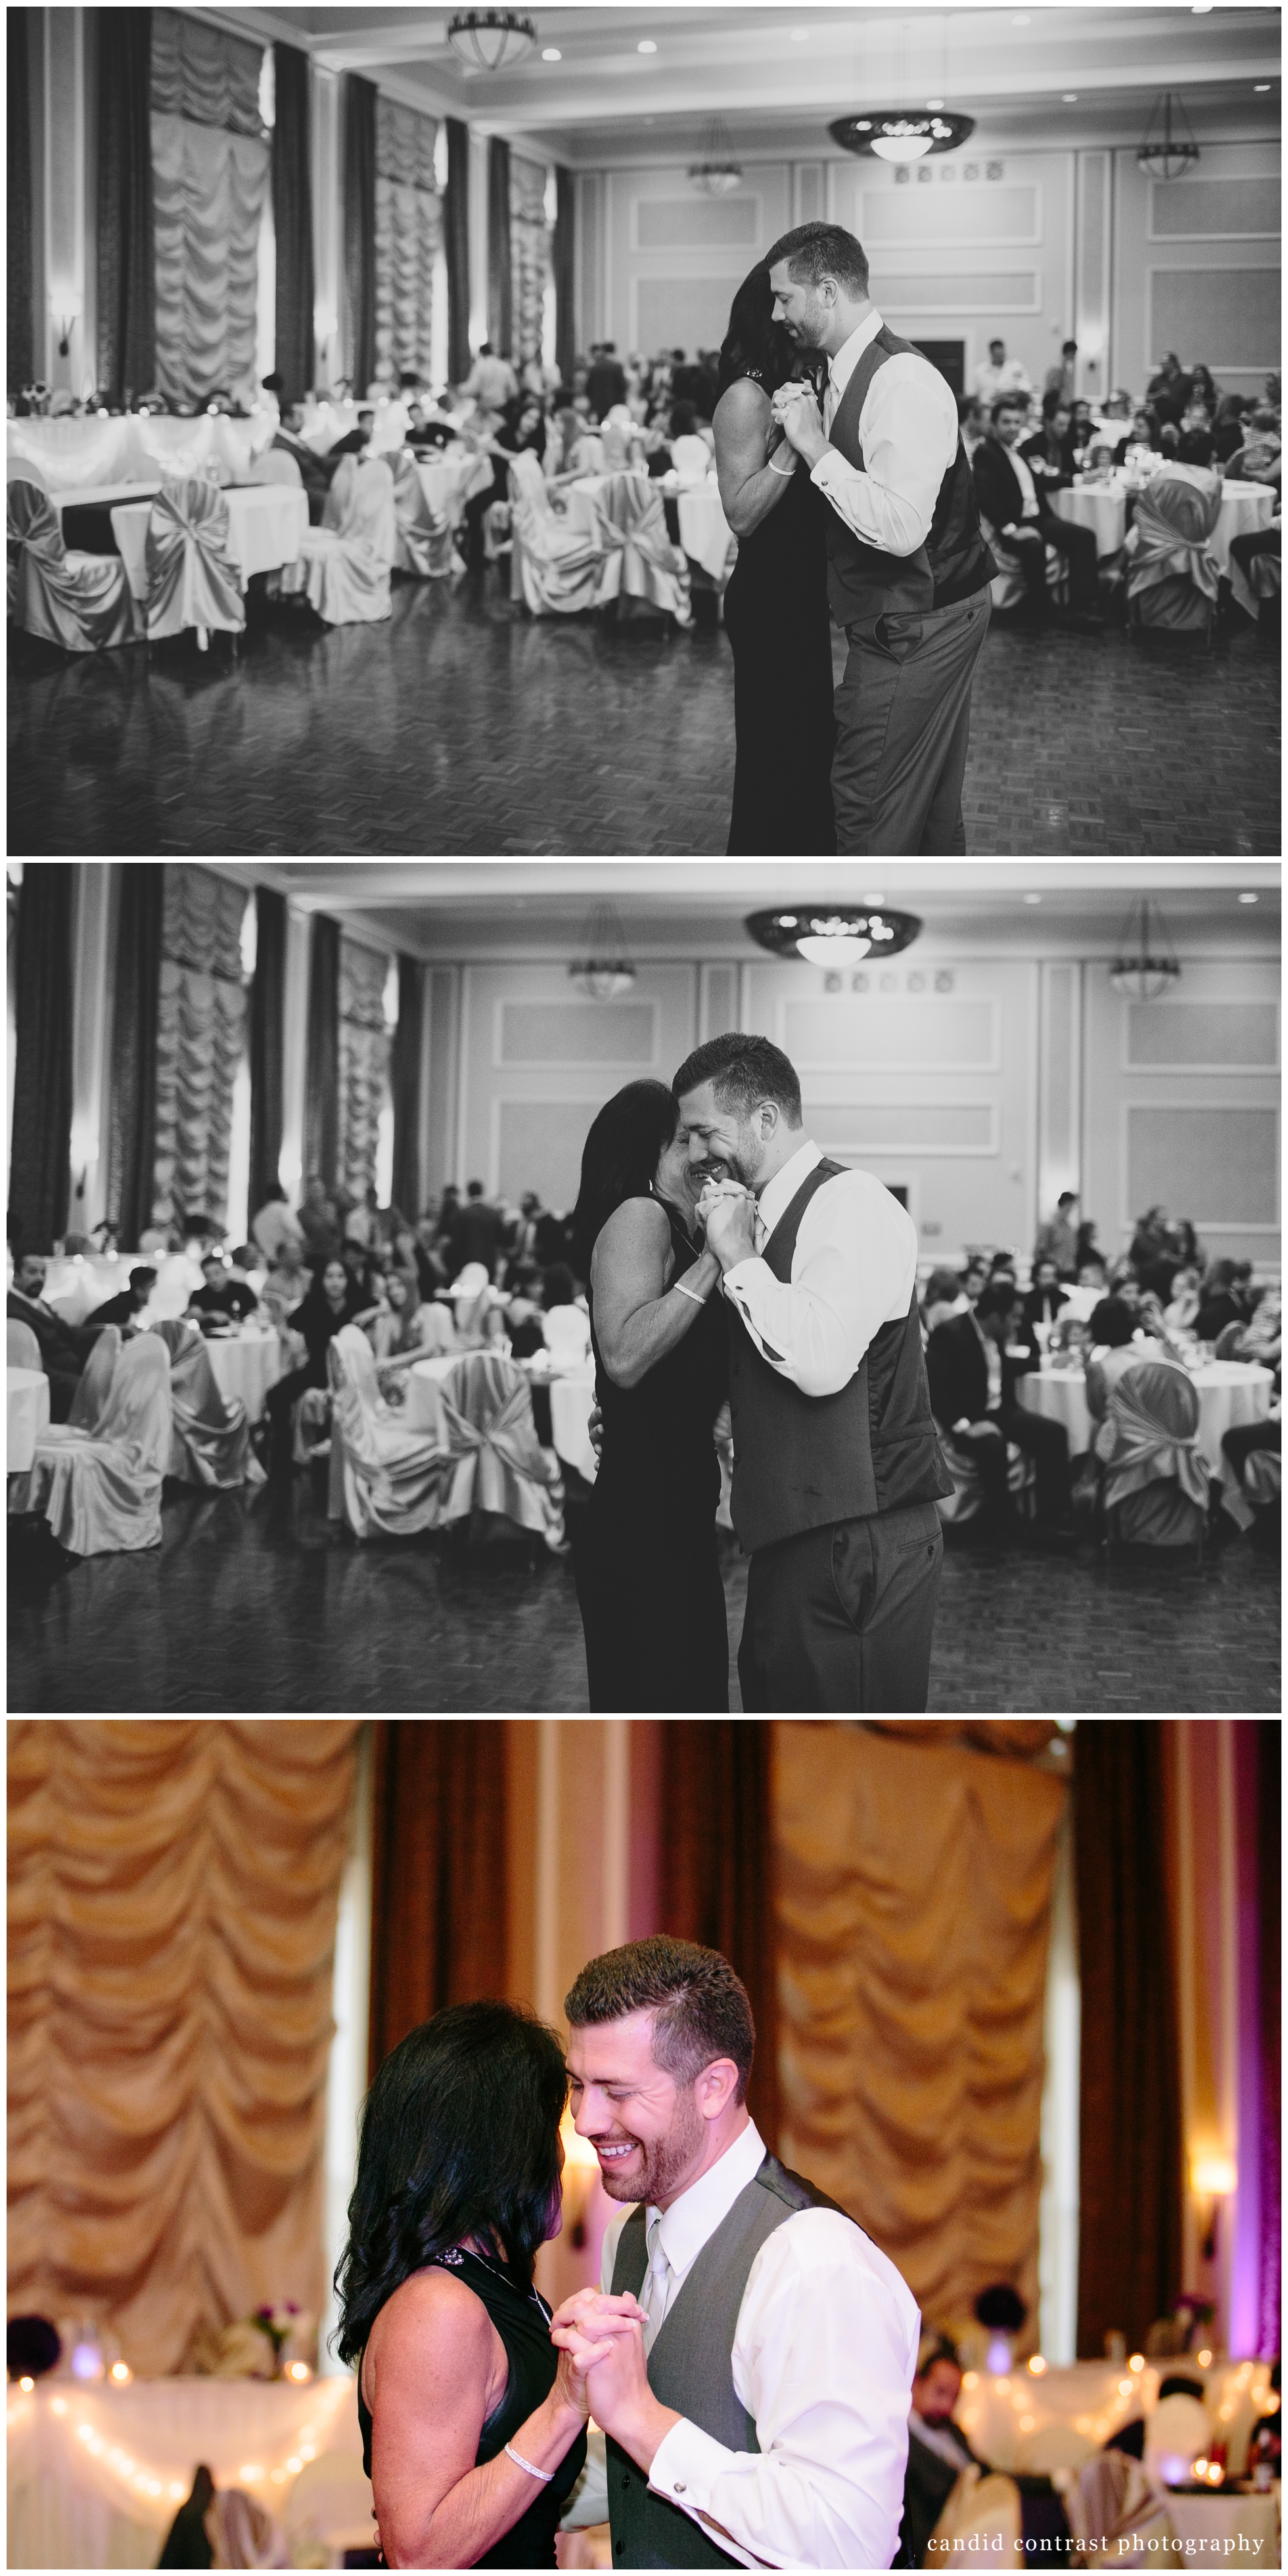 dancing at dubuque ia wedding reception at the hotel julien , candid contrast photography 